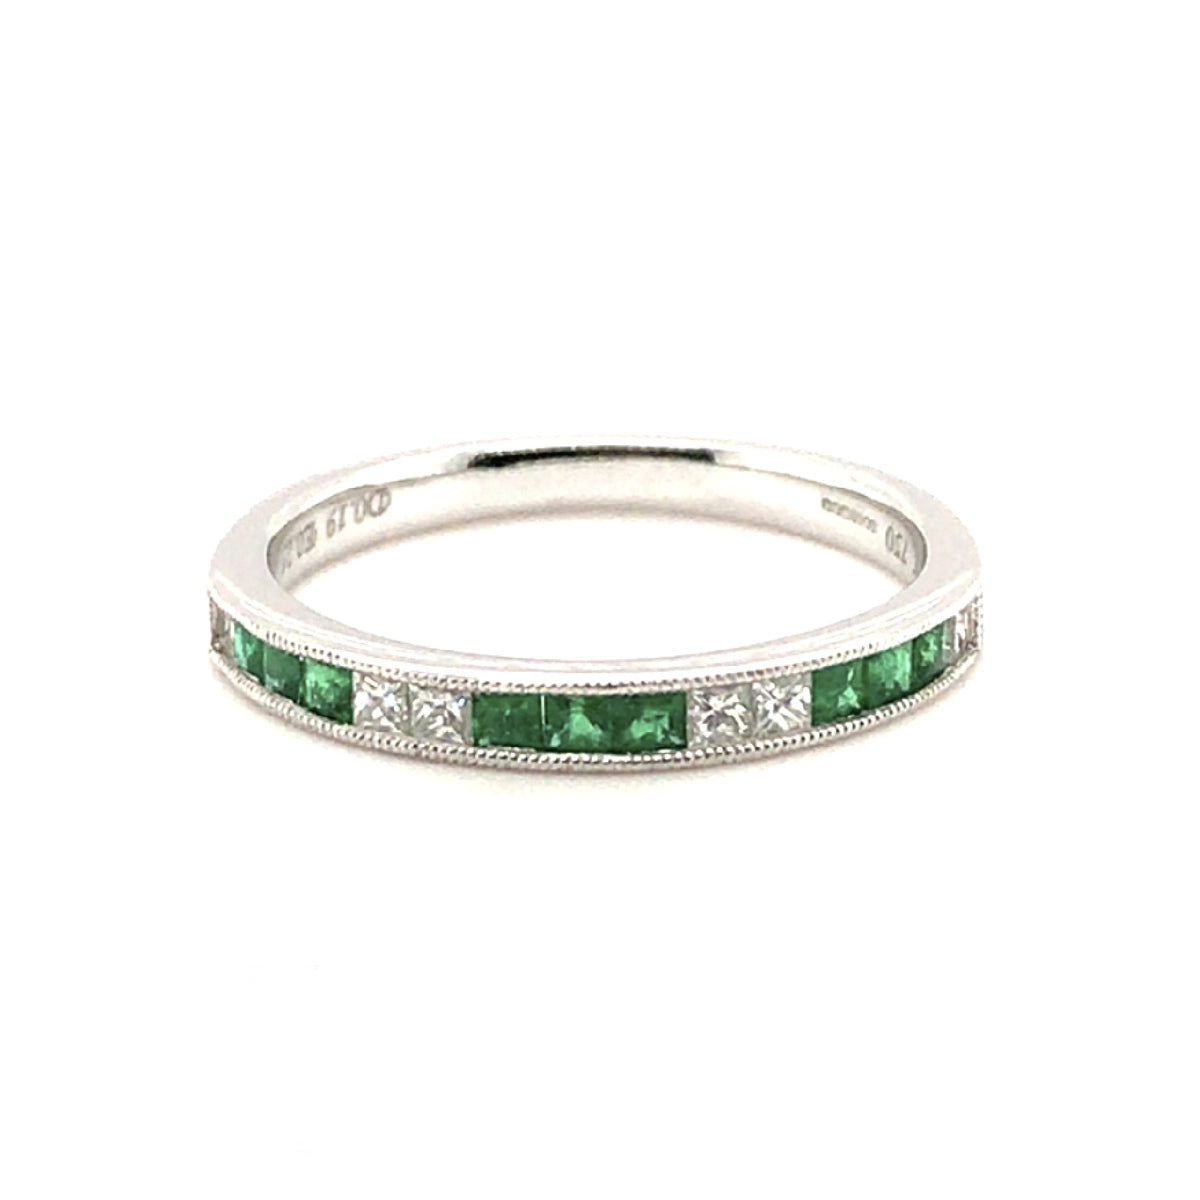 18ct White Gold Channel Set Emerald & Diamond Eternity Ring - Size N 1/2